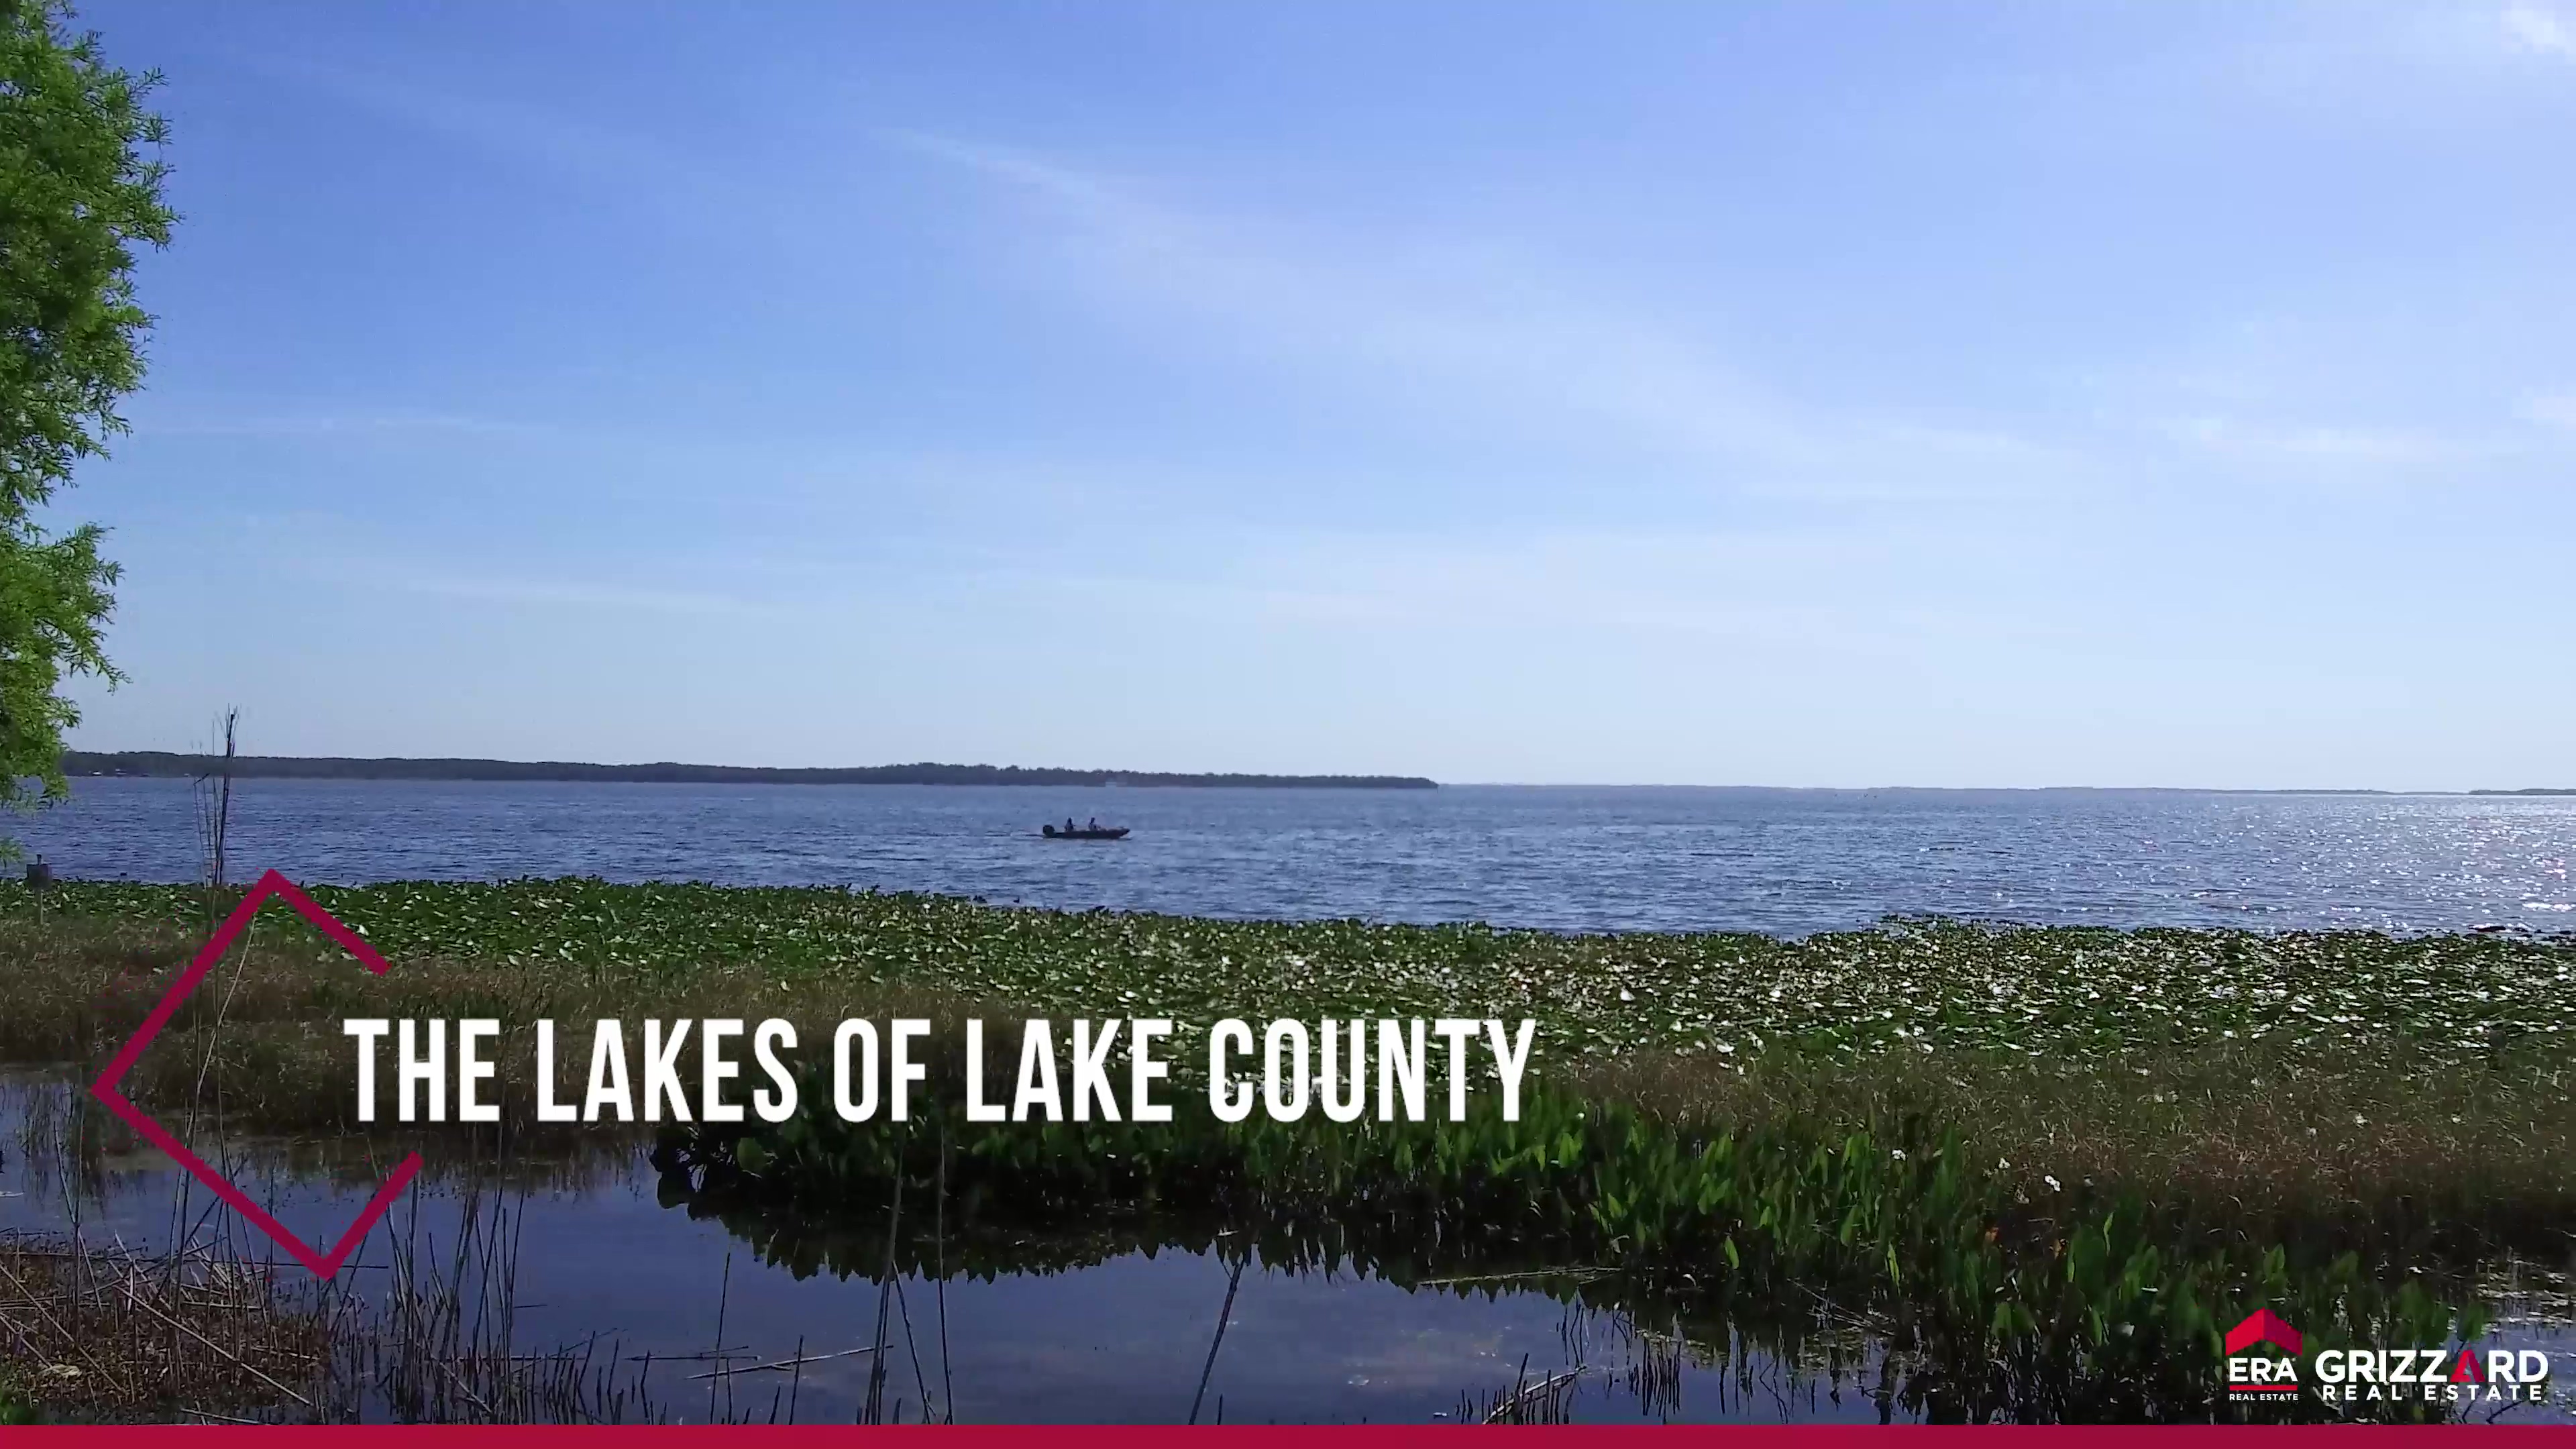 Explore the Lakes of Lake County